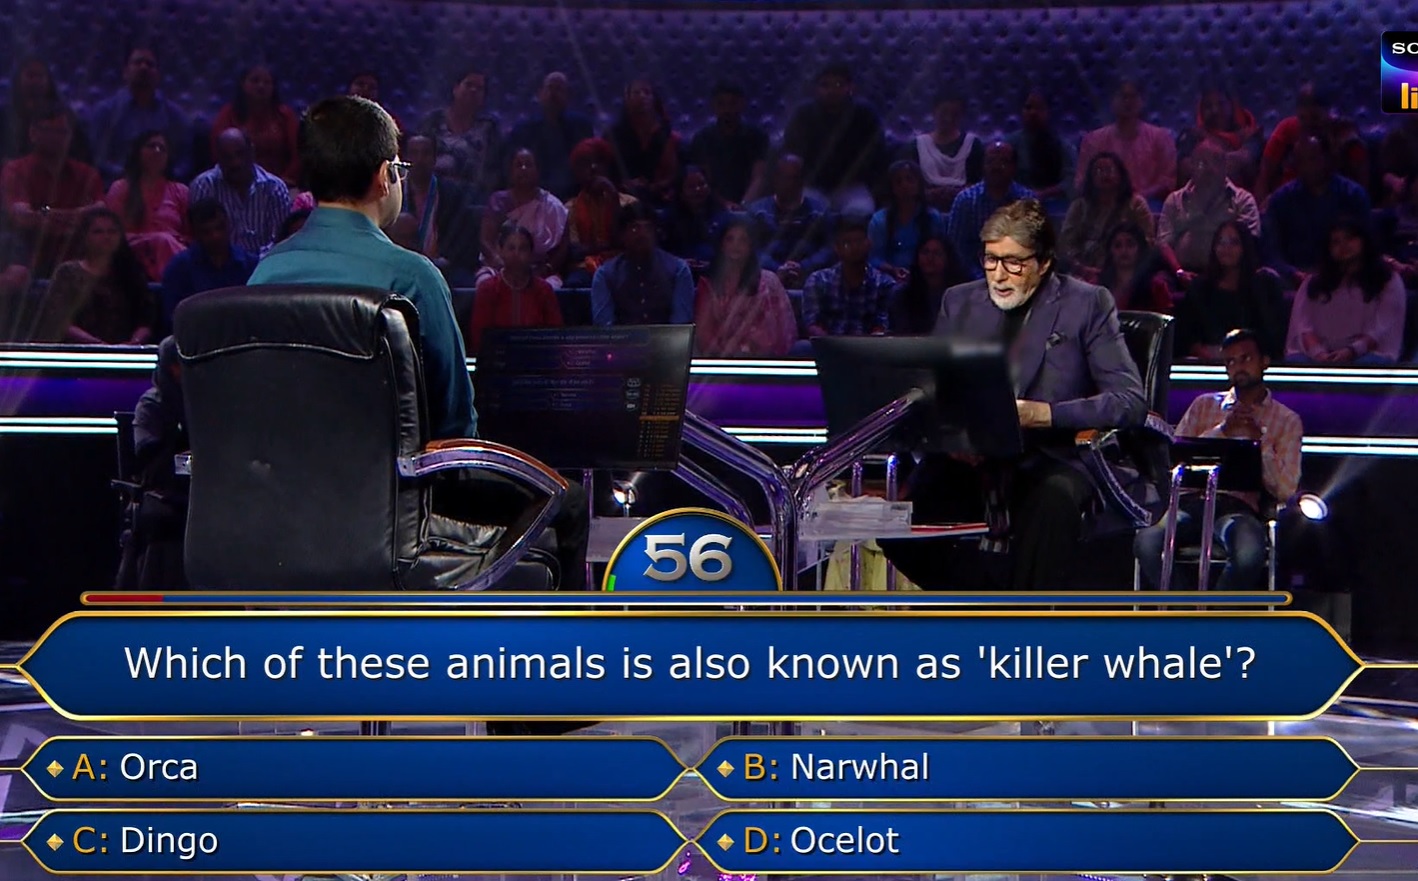 Ques : Which of these animals is also known as ‘killer whale’?